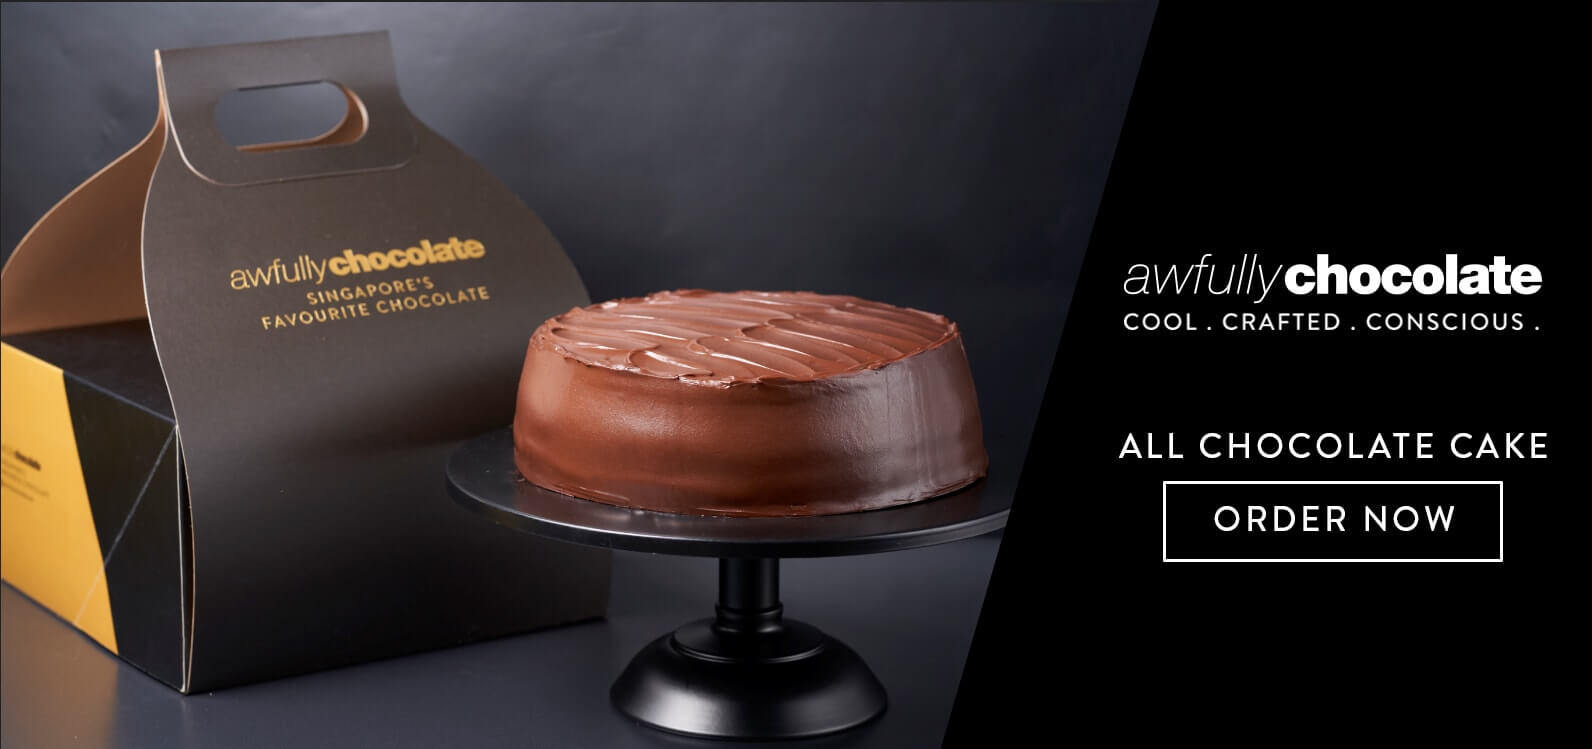 Awfully Chocolate Shop Famous Chocolate Cake Online With